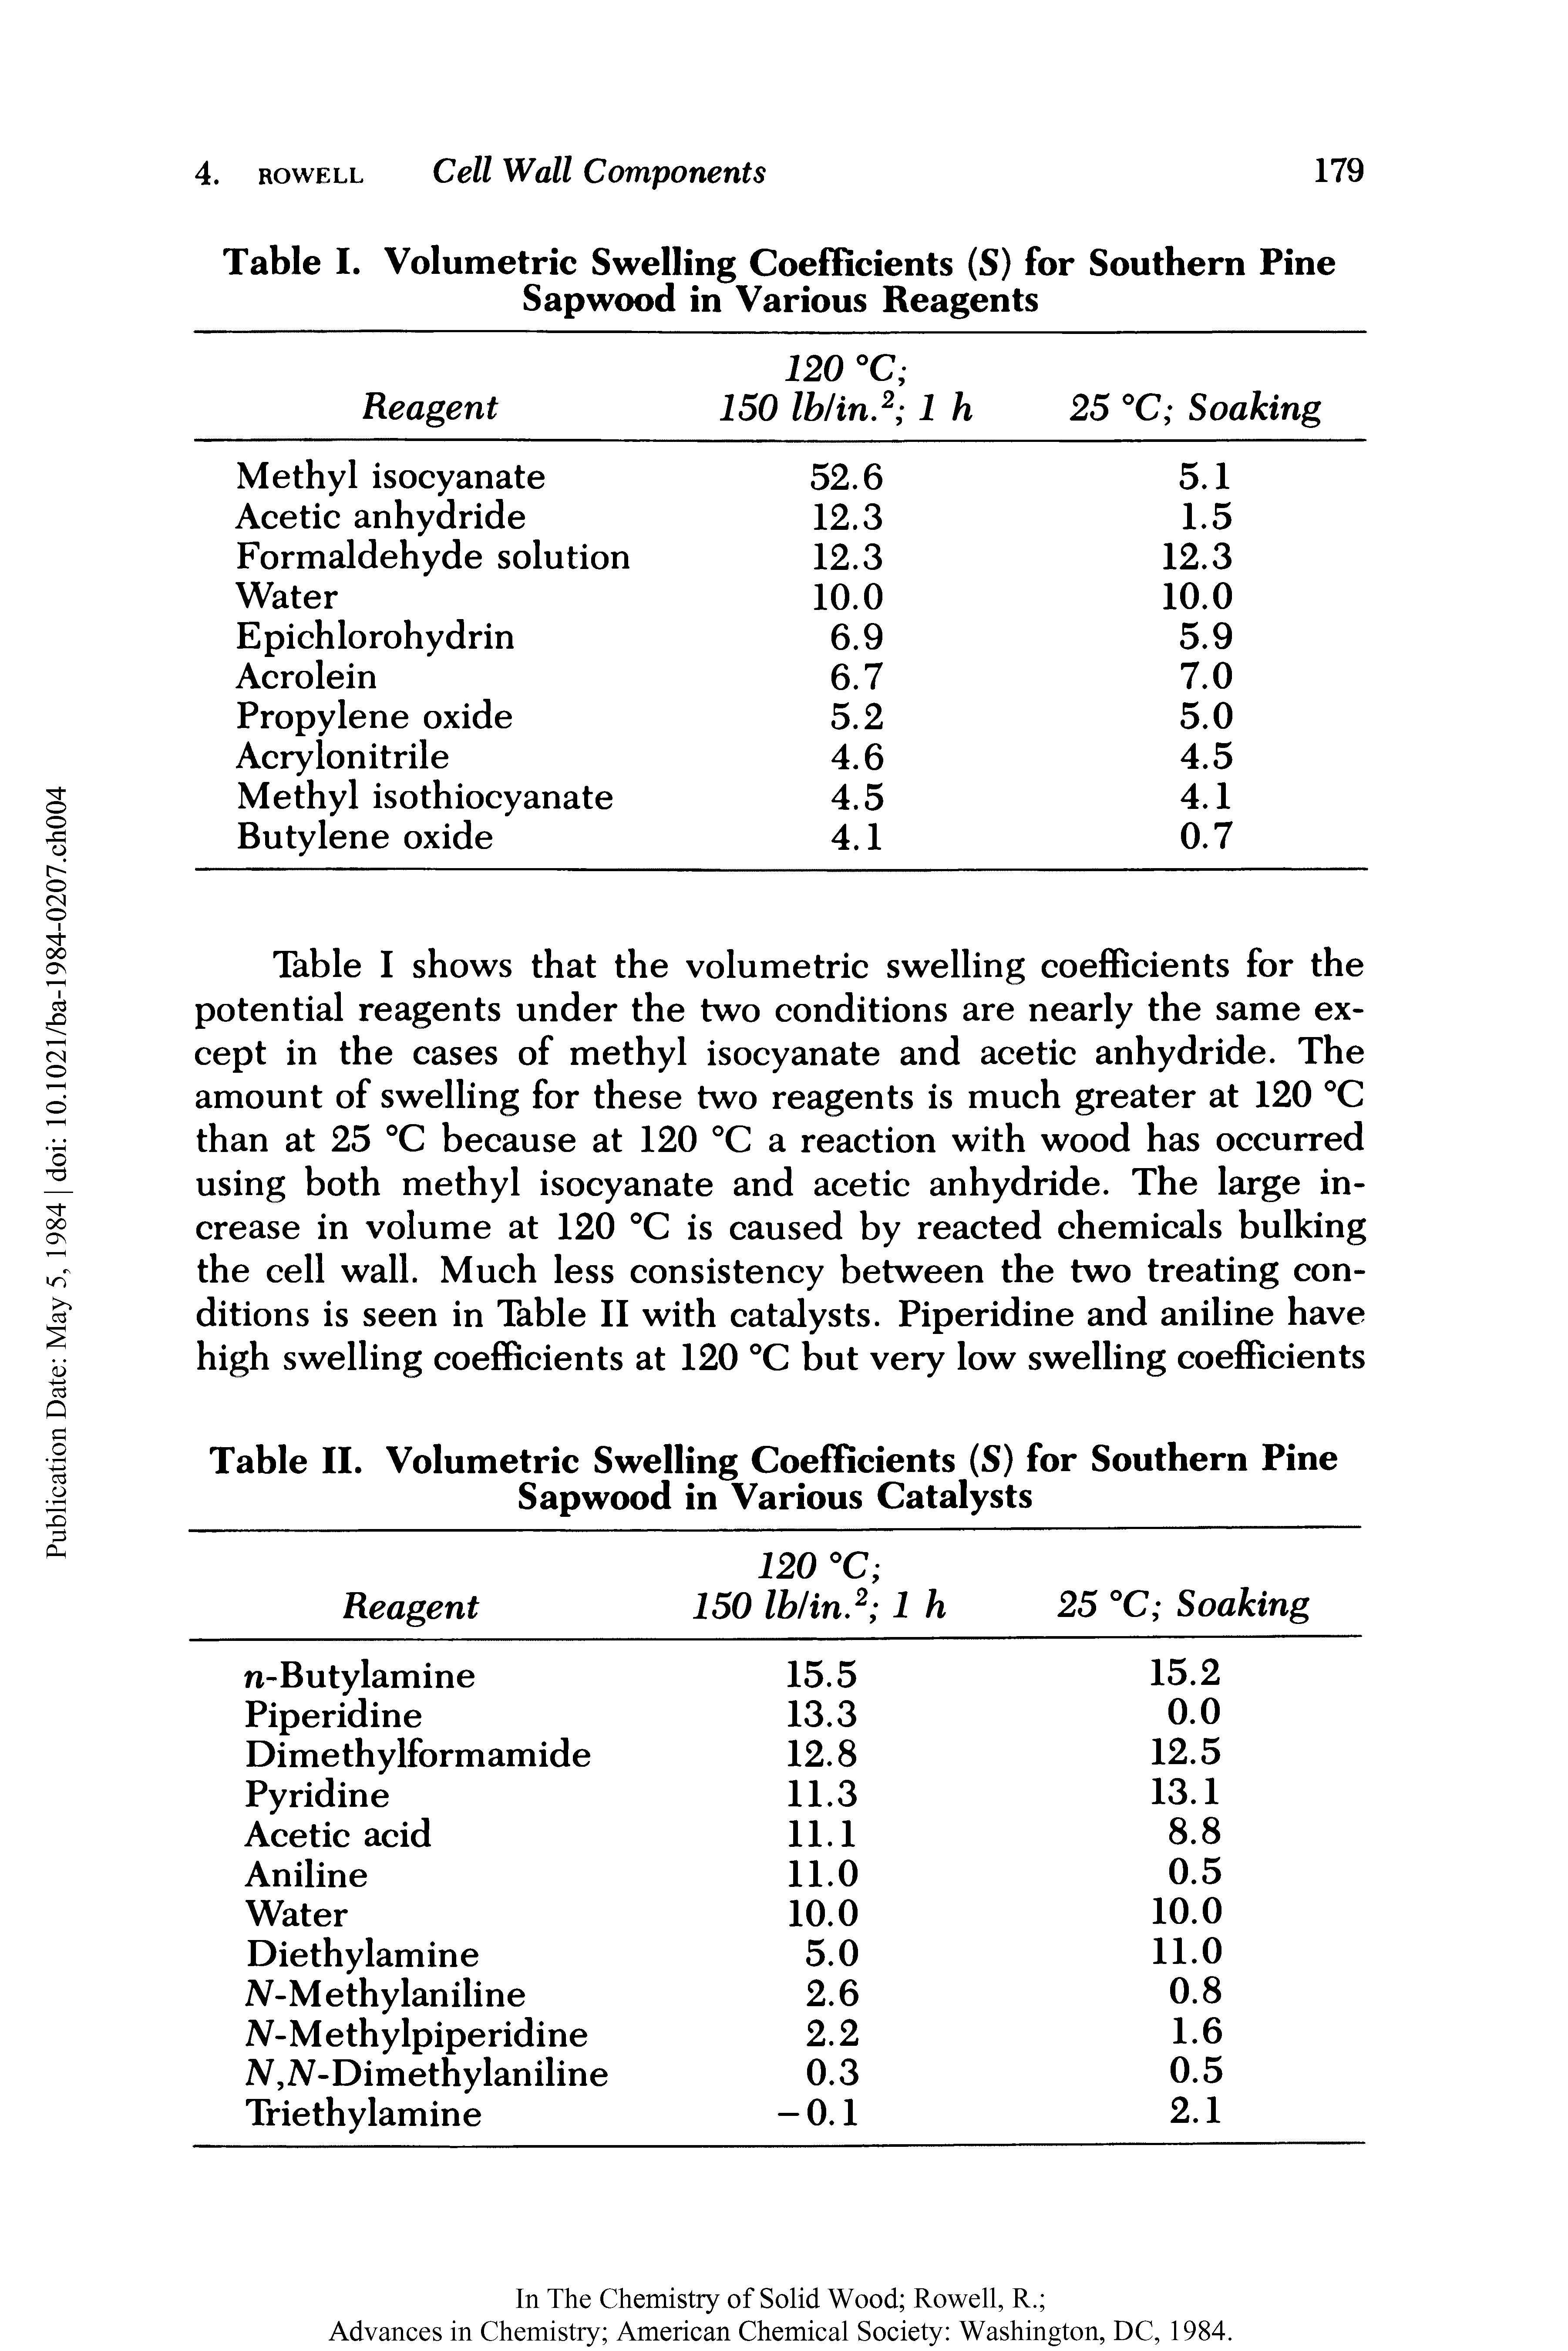 Table II. Volumetric Swelling Coefficients (S) for Southern Pine Sapwood in Various Catalysts...